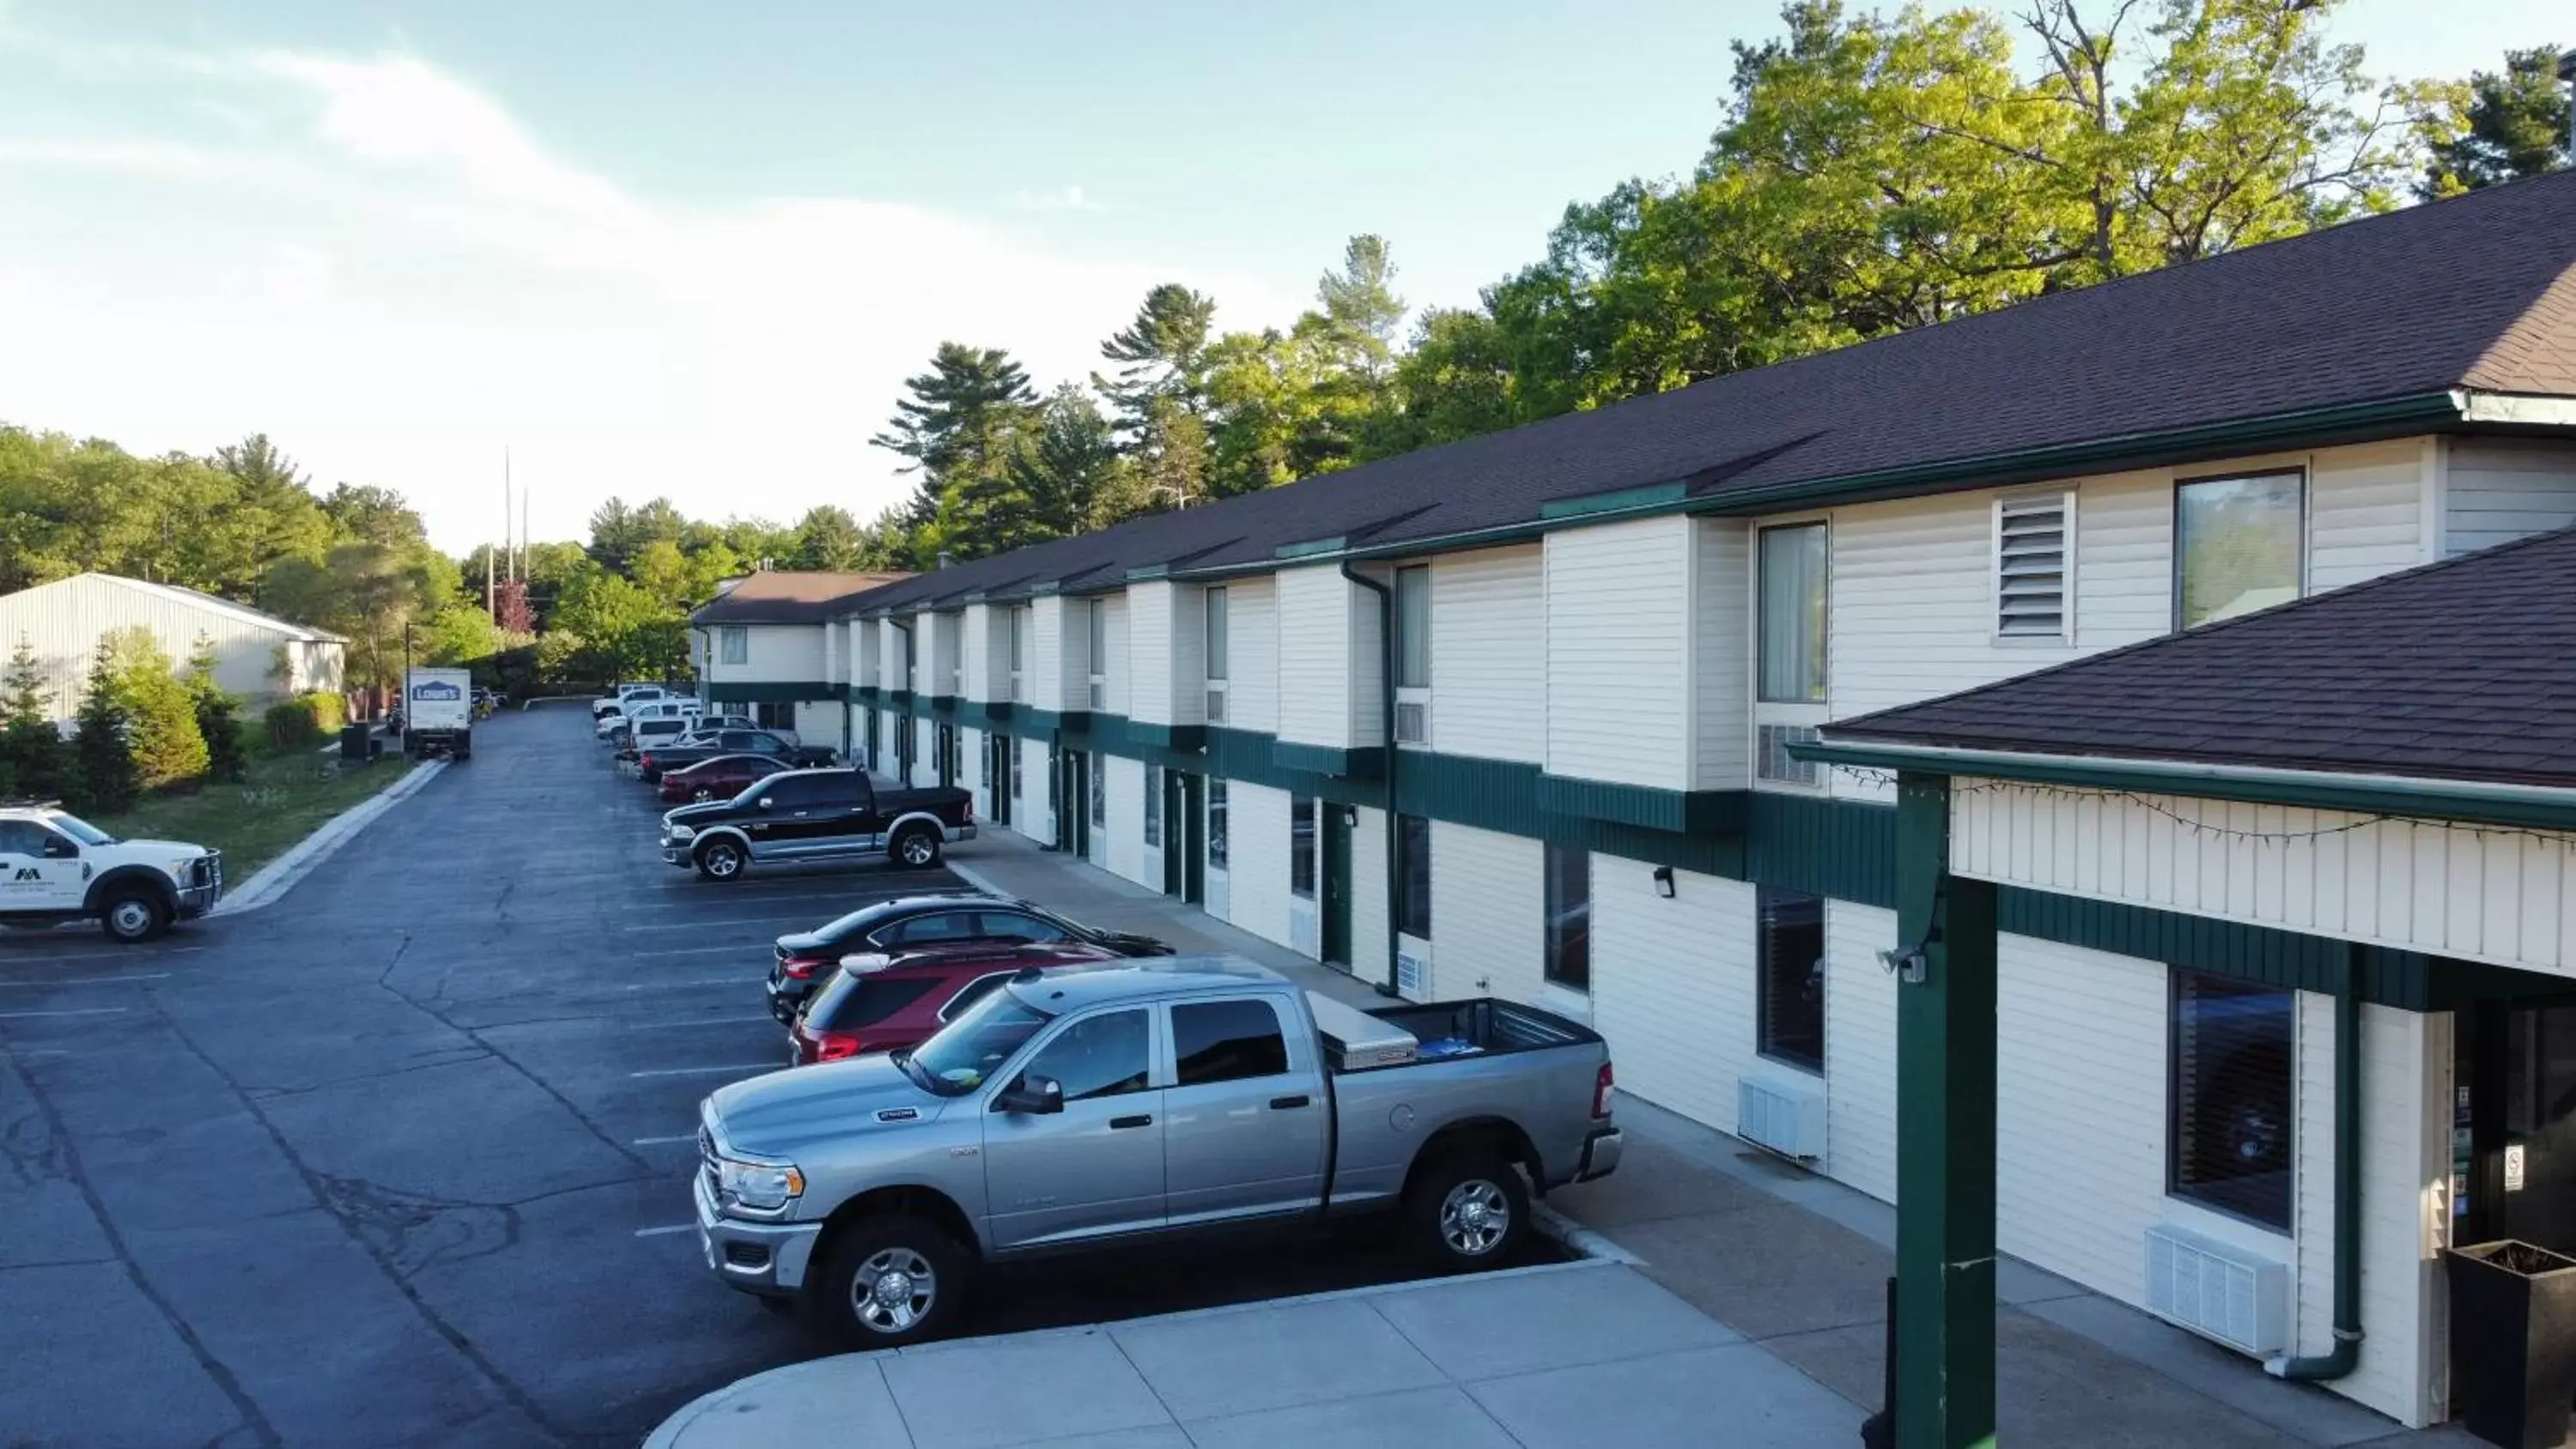 Property building in Quality Inn Traverse City